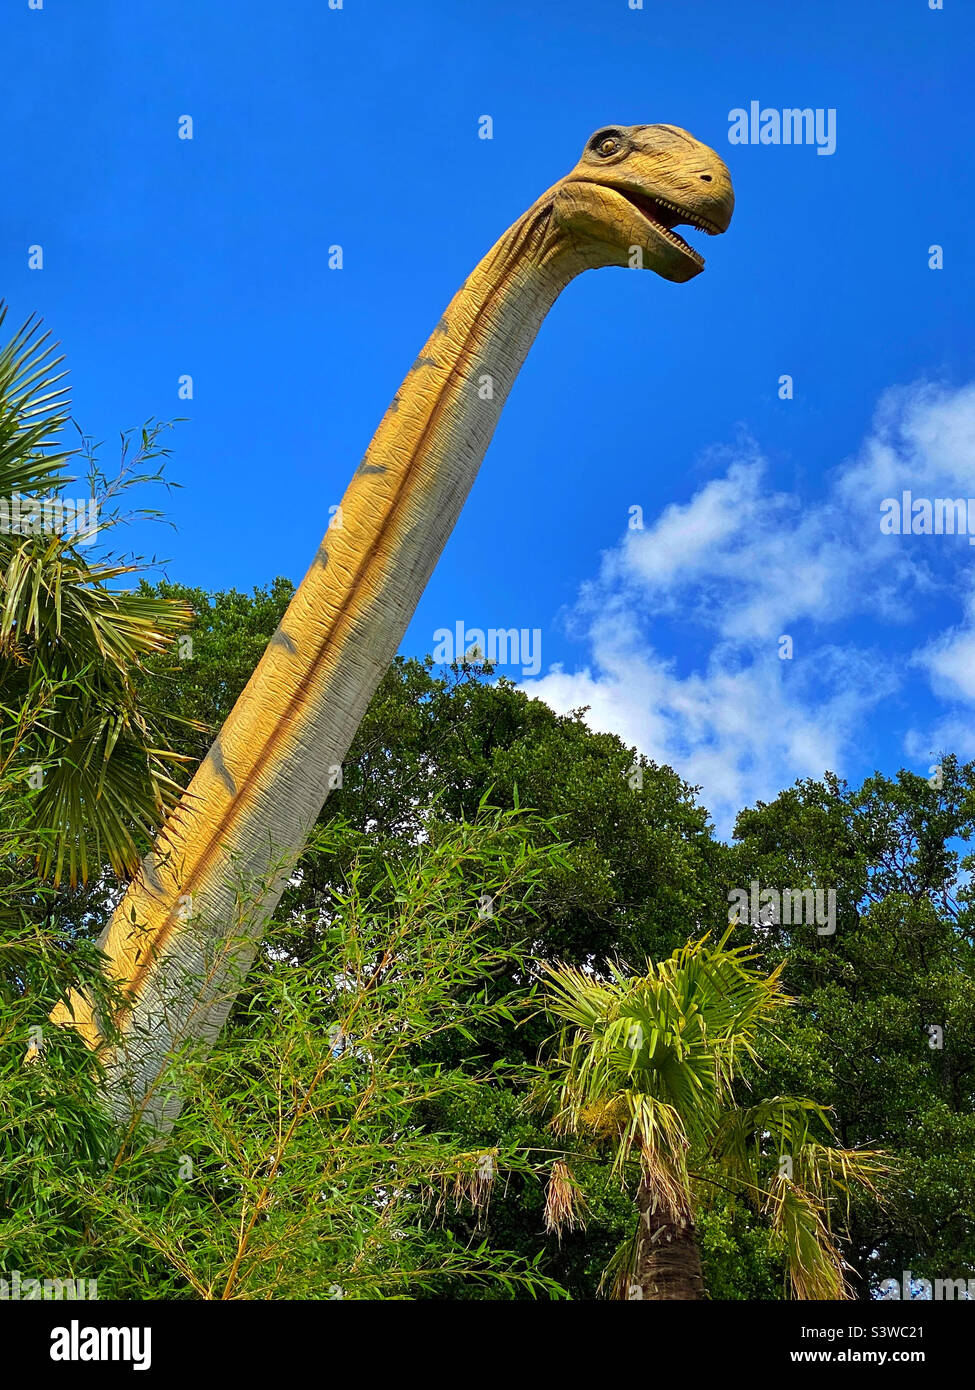 Dinosaurs with long necks are part of the Sauropod or plant eating group. Their elongated necks helped reach or grab vegetation. They mostly existed during the Jurassic and Cretaceous Periods. ©️ Stock Photo